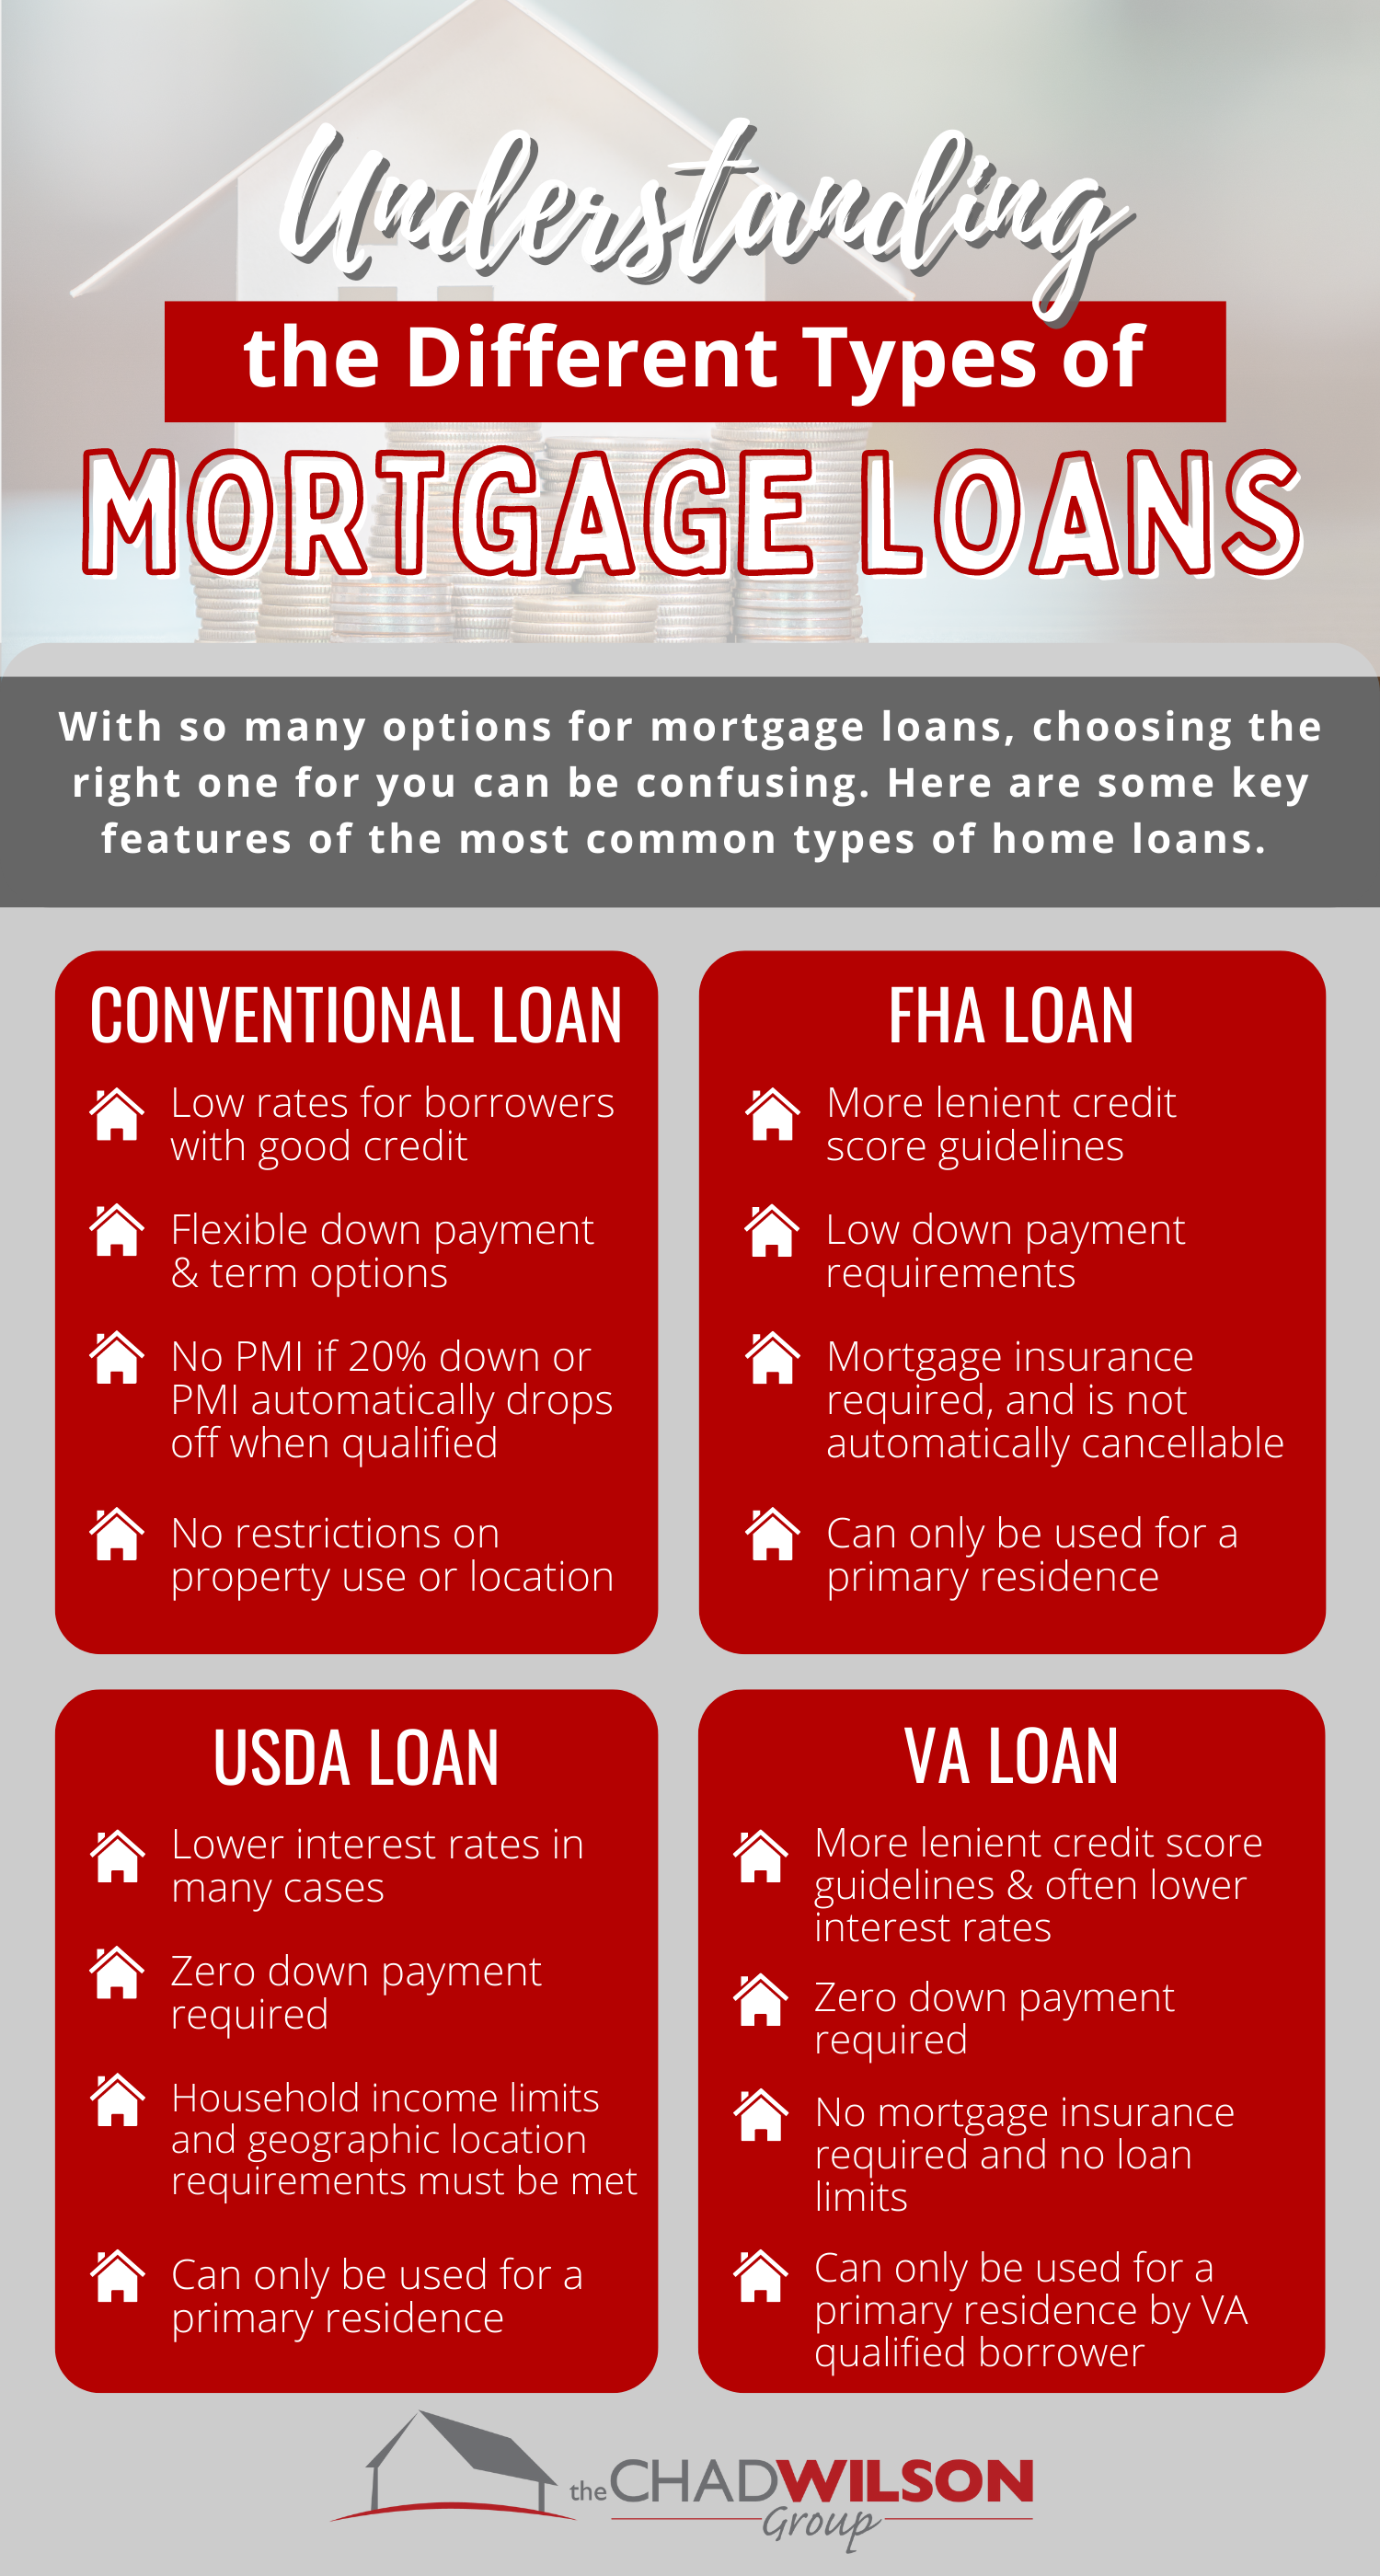 Understanding the Different Types of Mortgage Loans